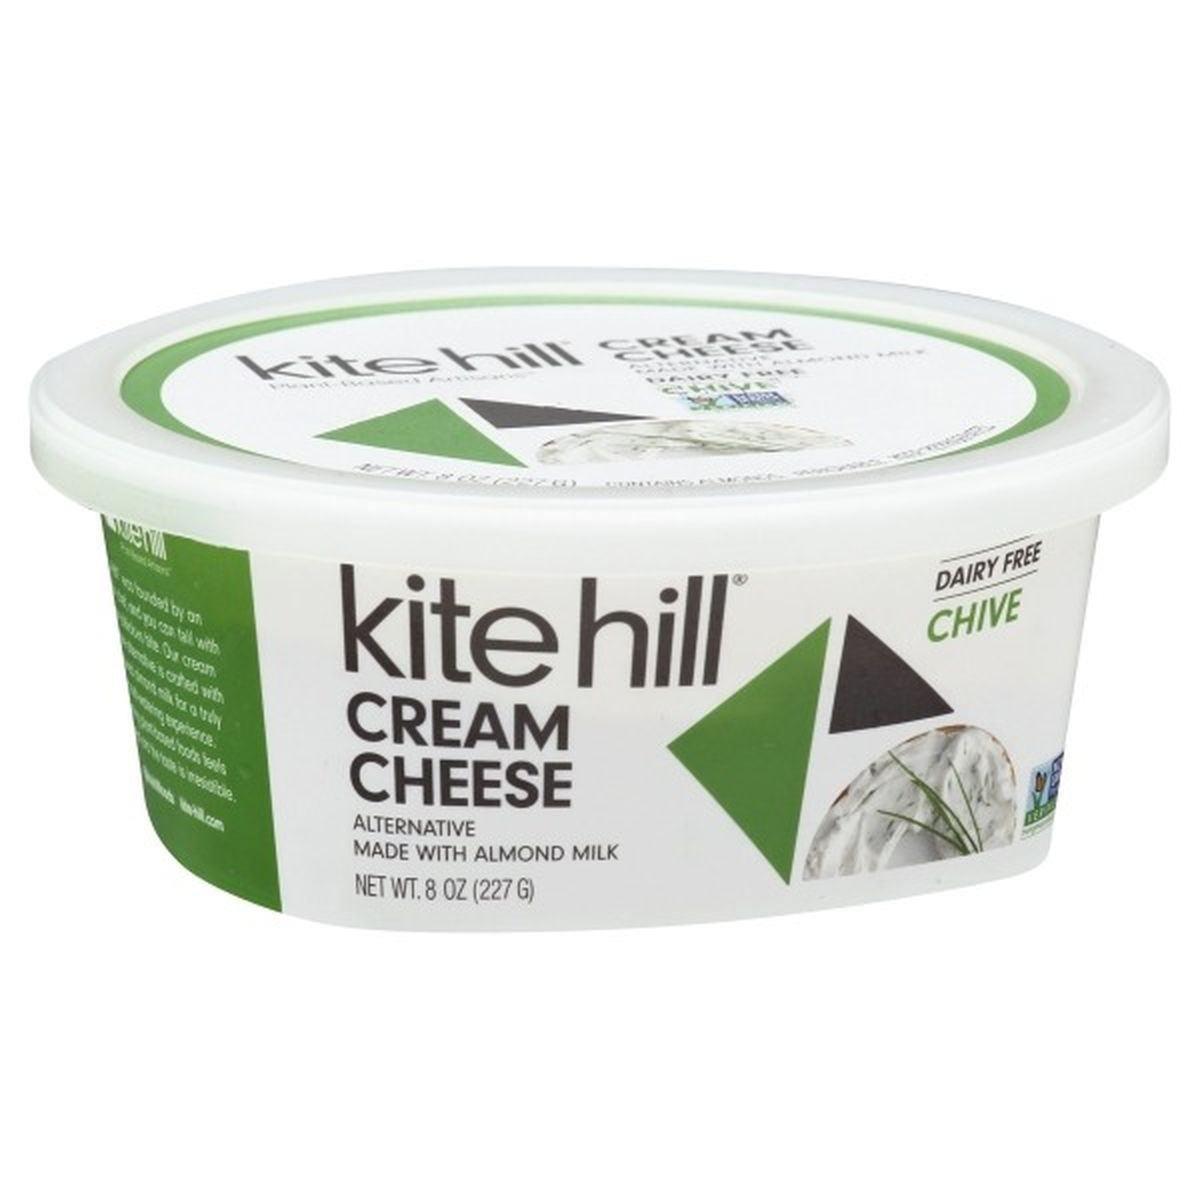 Calories in Kite Hill Cream Cheese, Dairy Free, Chive